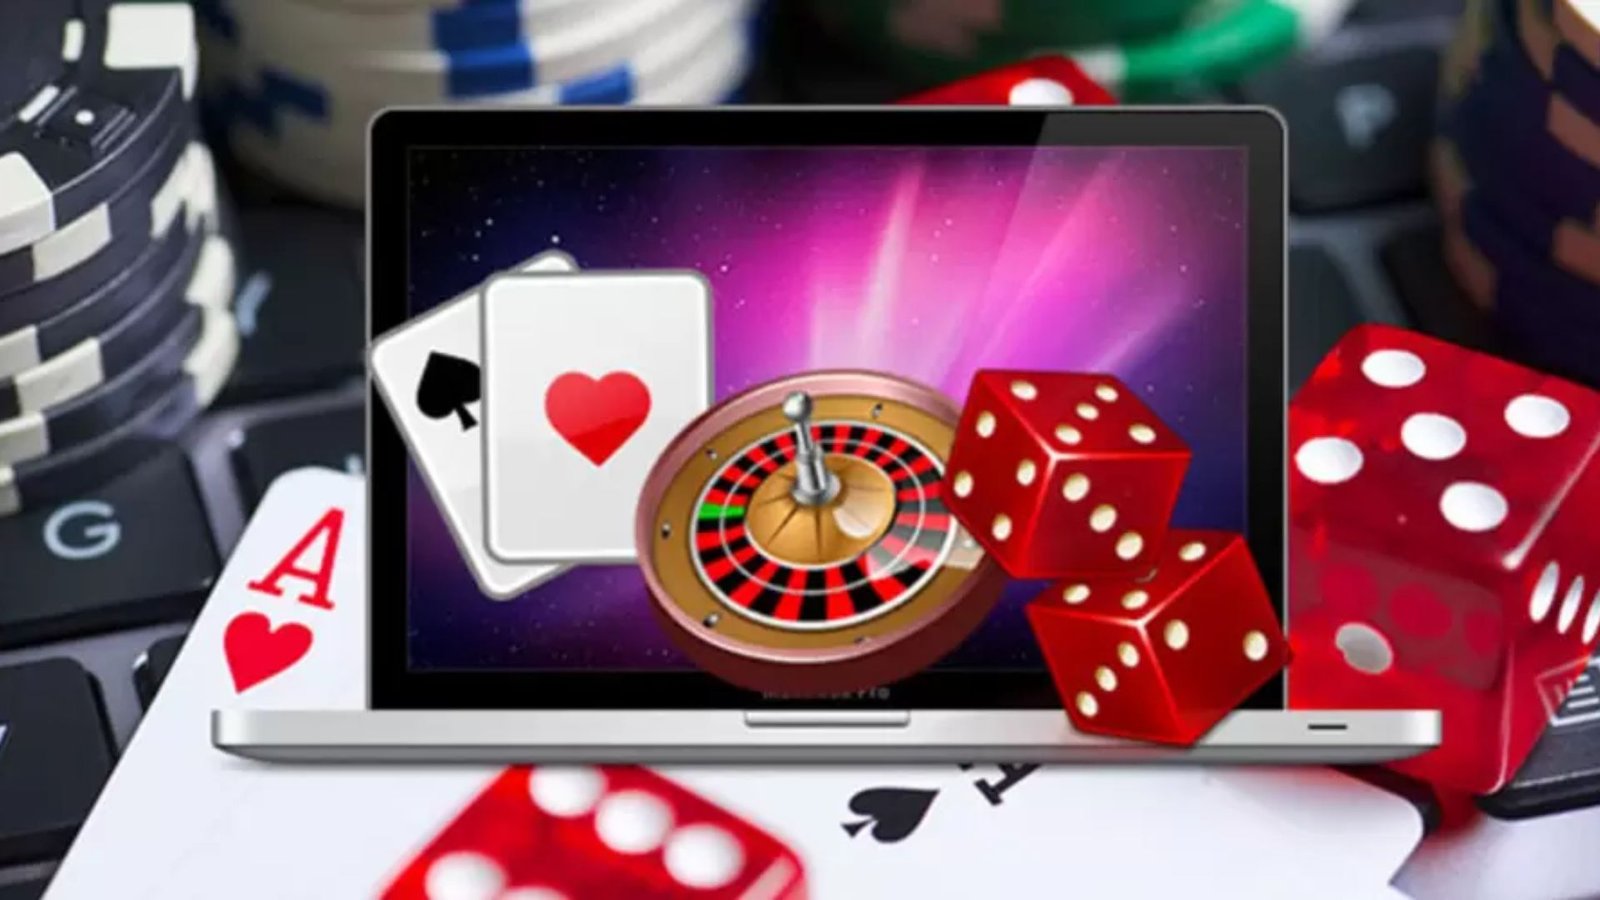 this image shows Online gambling